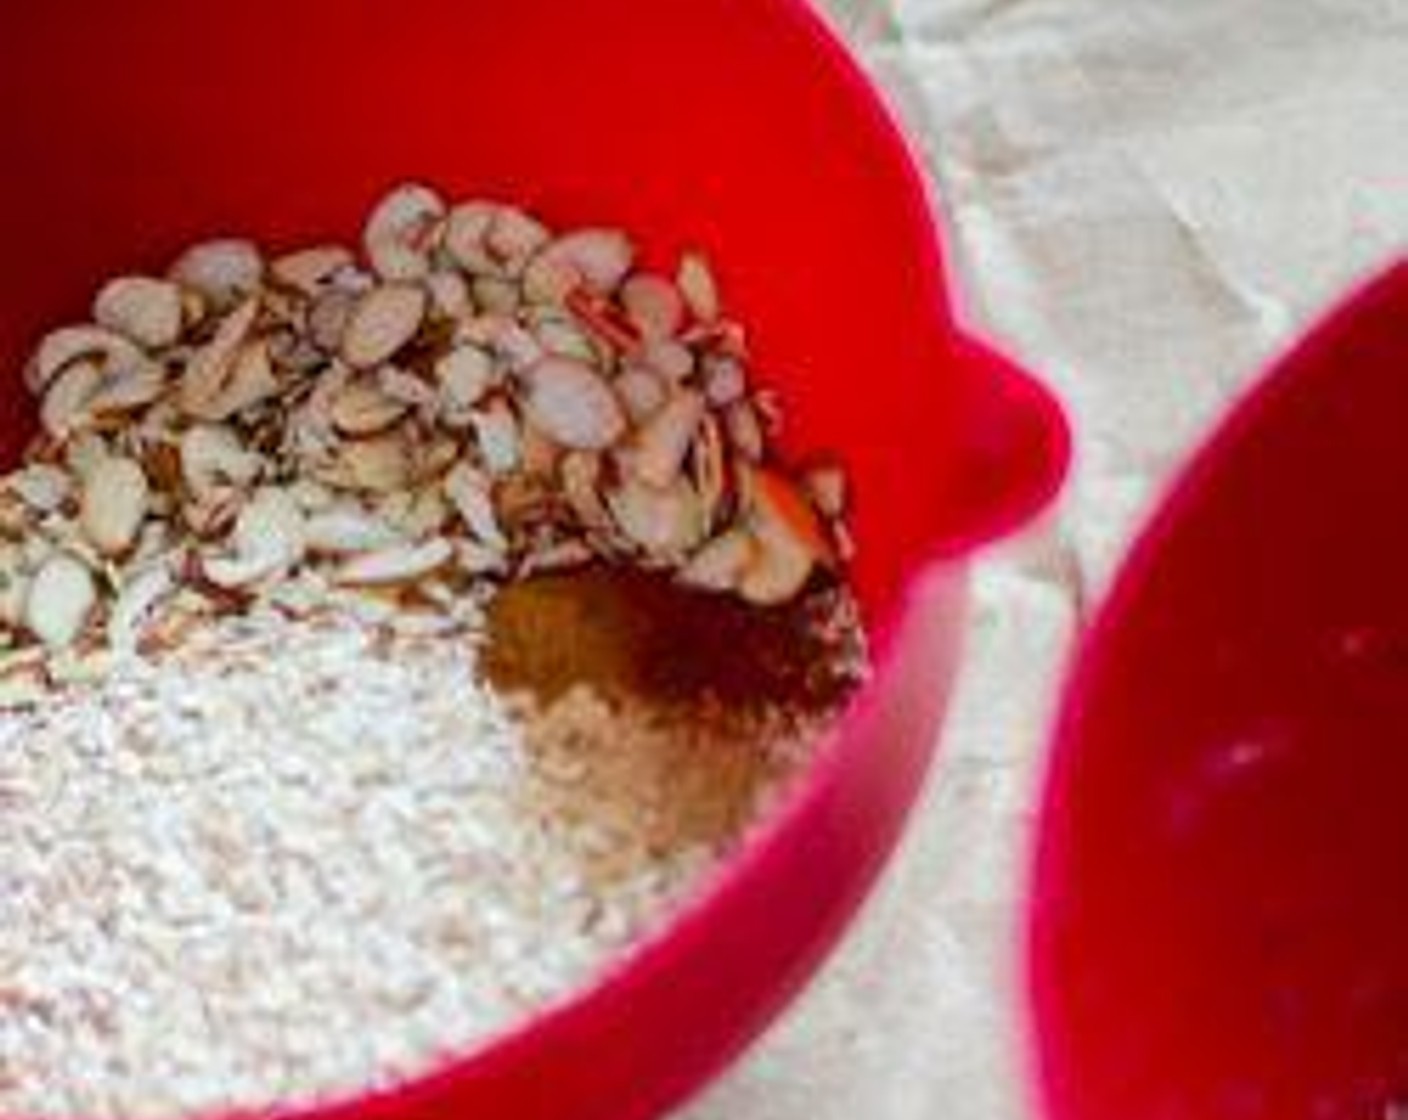 step 2 Mix together the Oats (1 3/4 cups), Slivered Almonds (1/2 cup), Ground Cinnamon (1 tsp), and Ground Ginger (1/2 tsp).